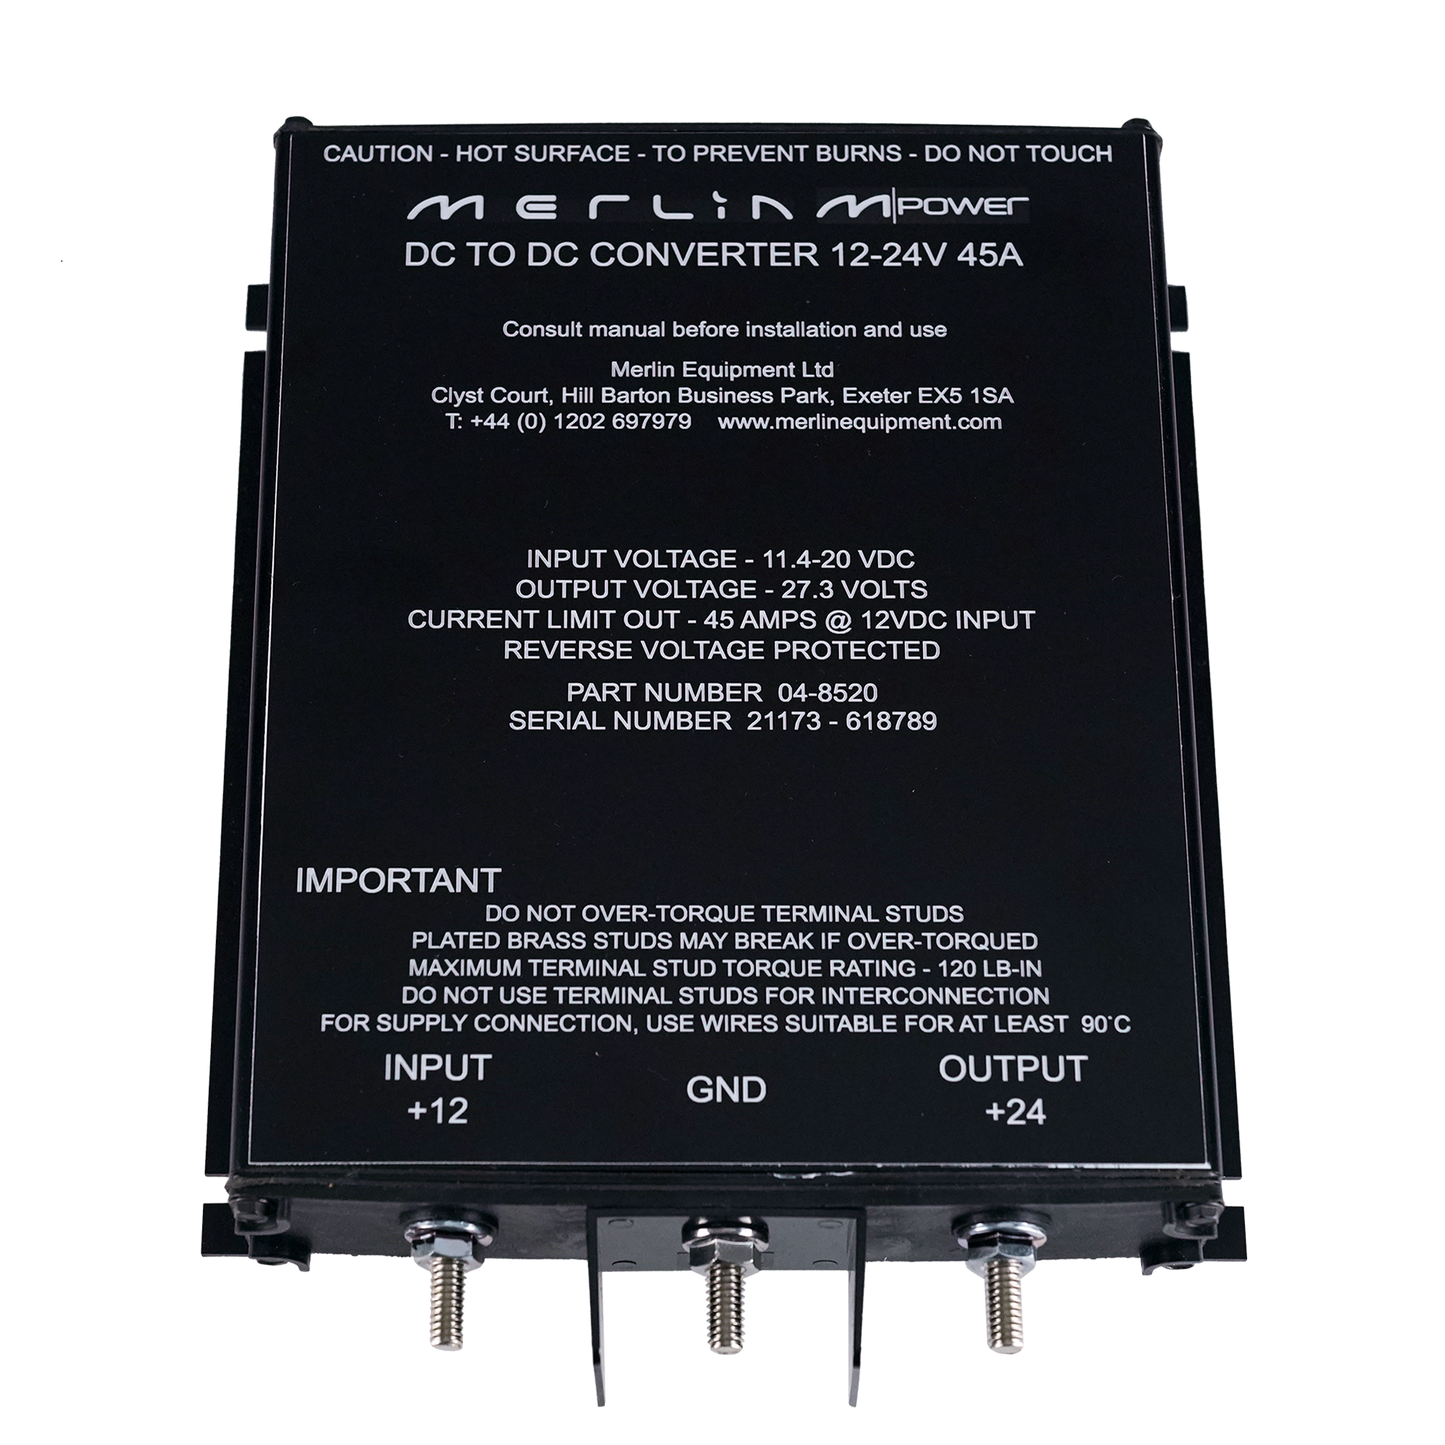 DC to DC Converter 45amps (12 to 24v)